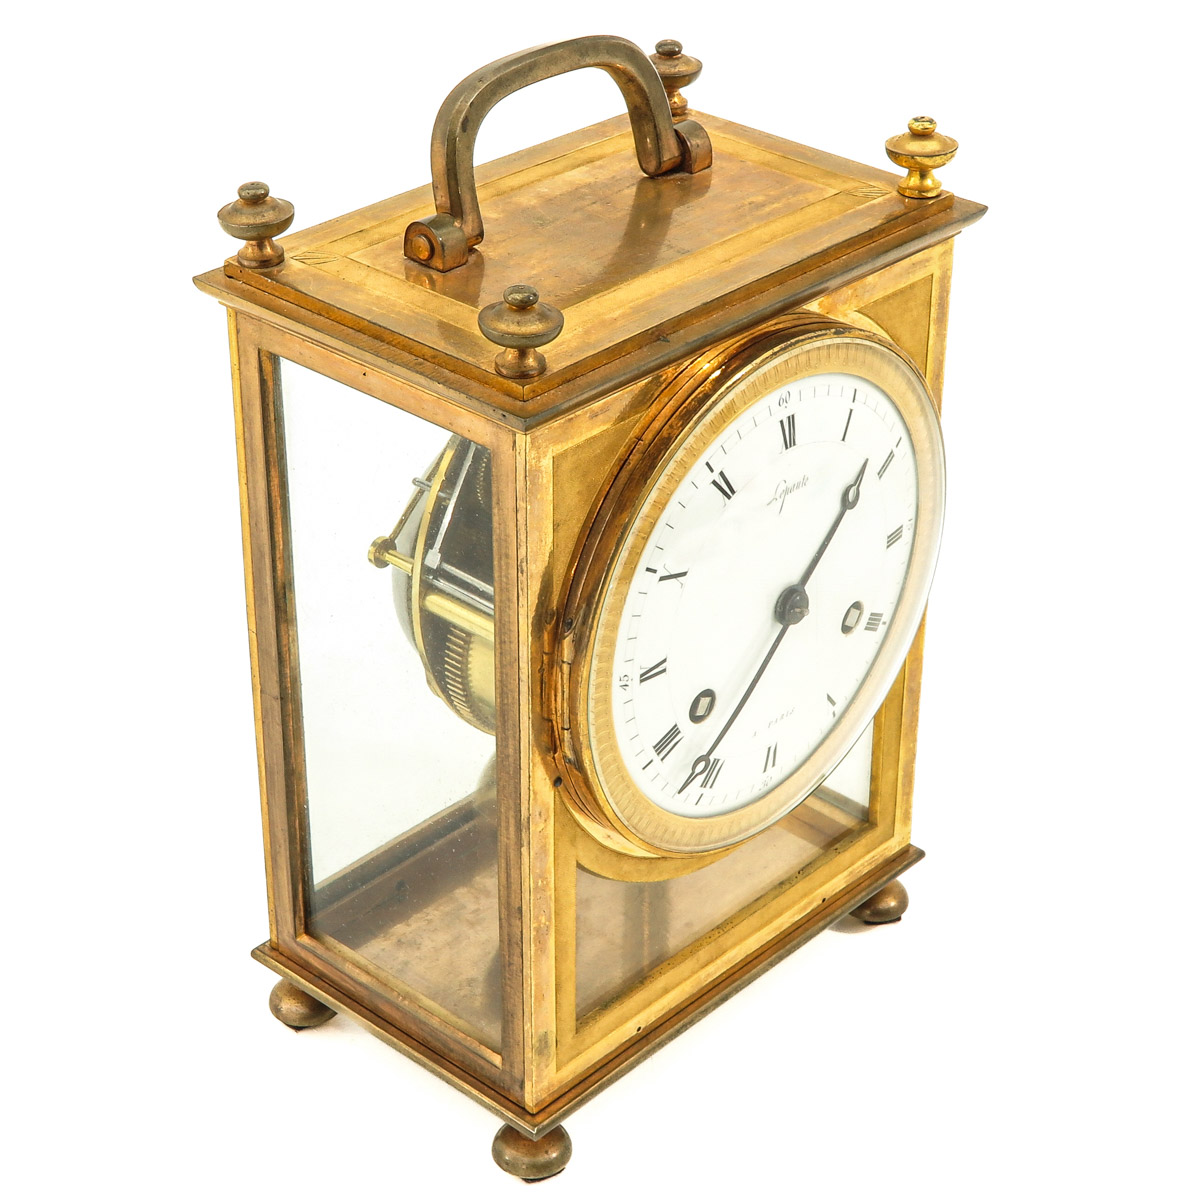 A French Carriage Clock - Image 9 of 9